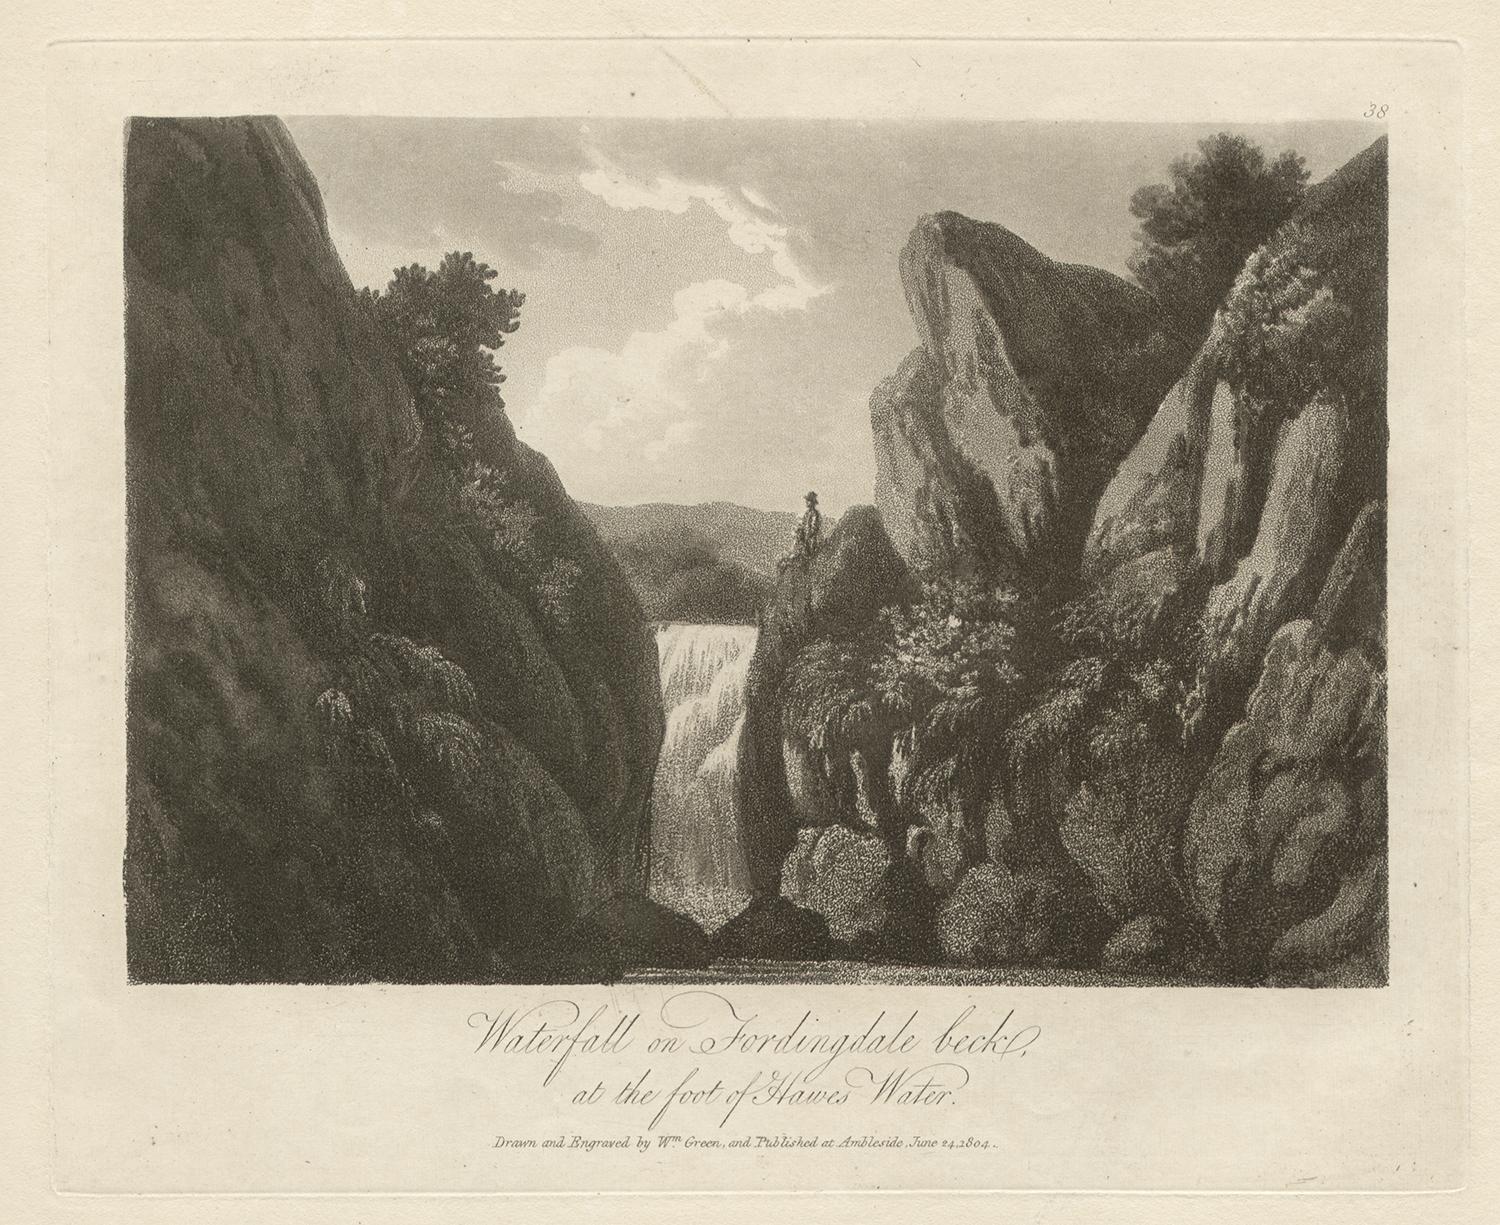 William Green Landscape Print - Waterfall on Fordingdale beck, Lake District scenery C19th English aquatint